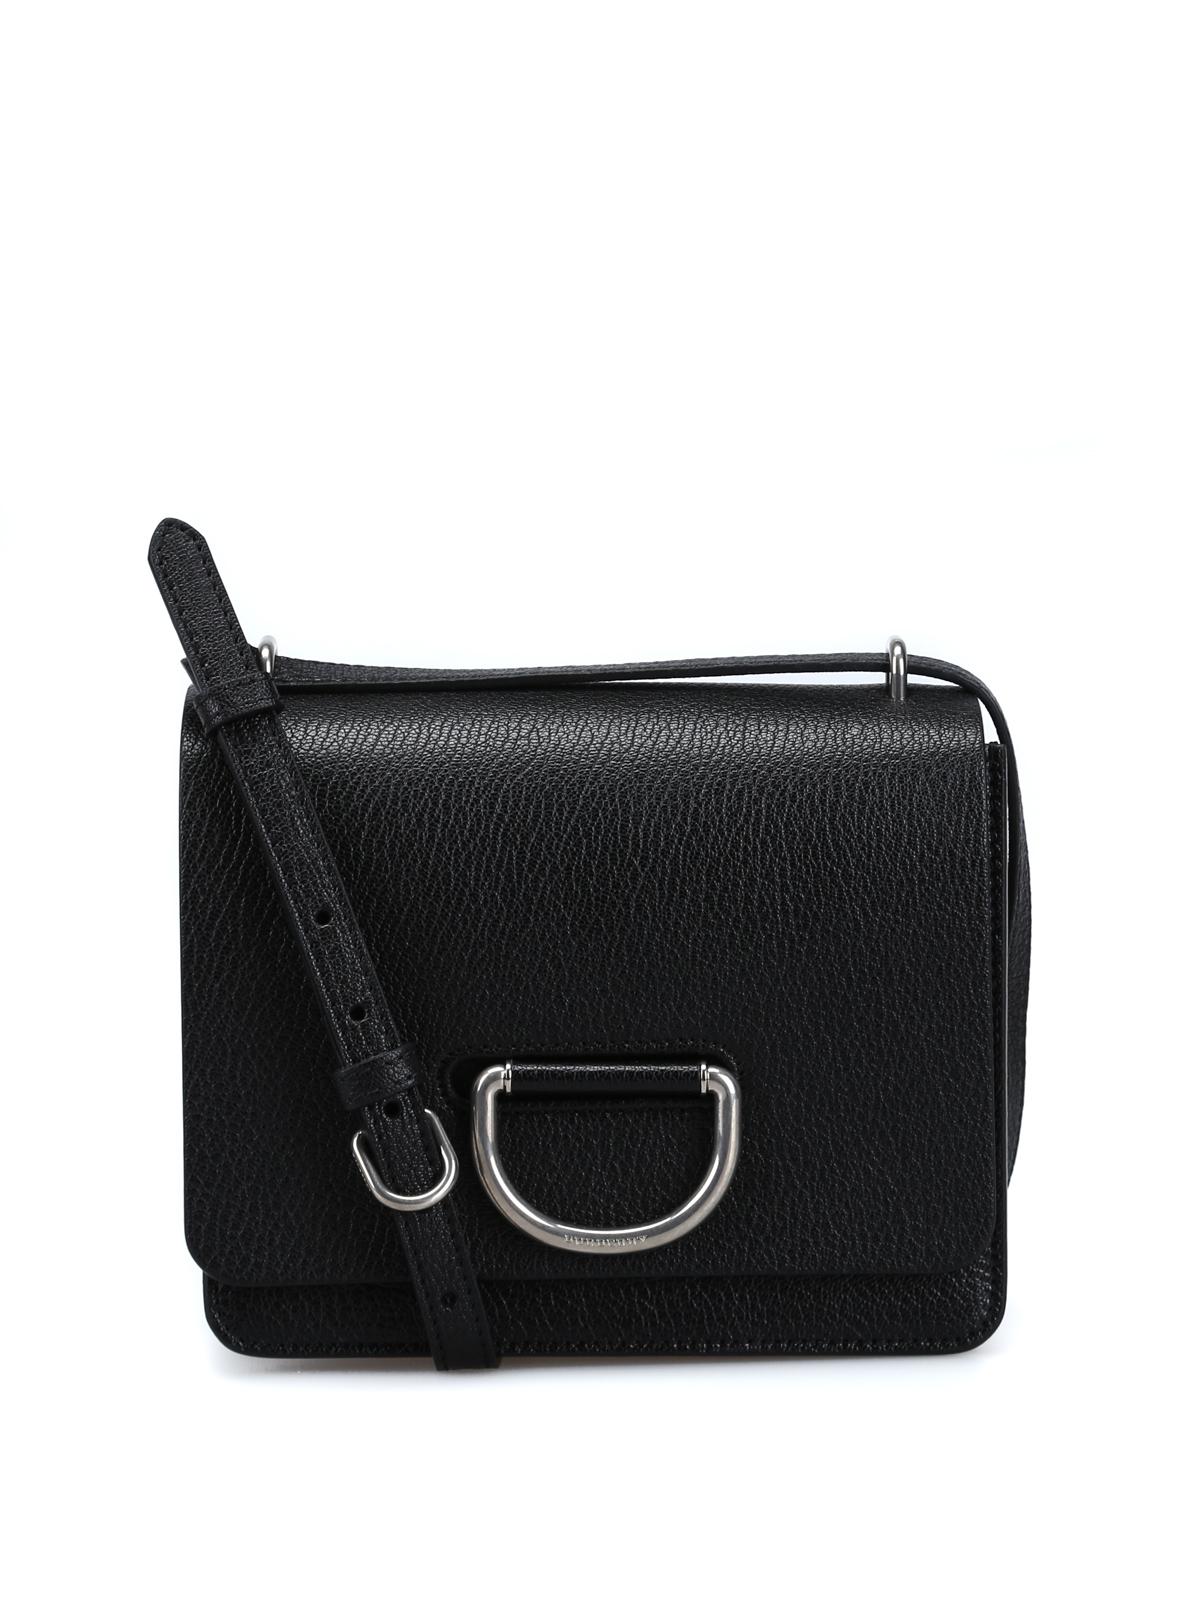 Burberry Leather D-ring Grainy Goatskin Small Crossbody Bag in Black - Lyst